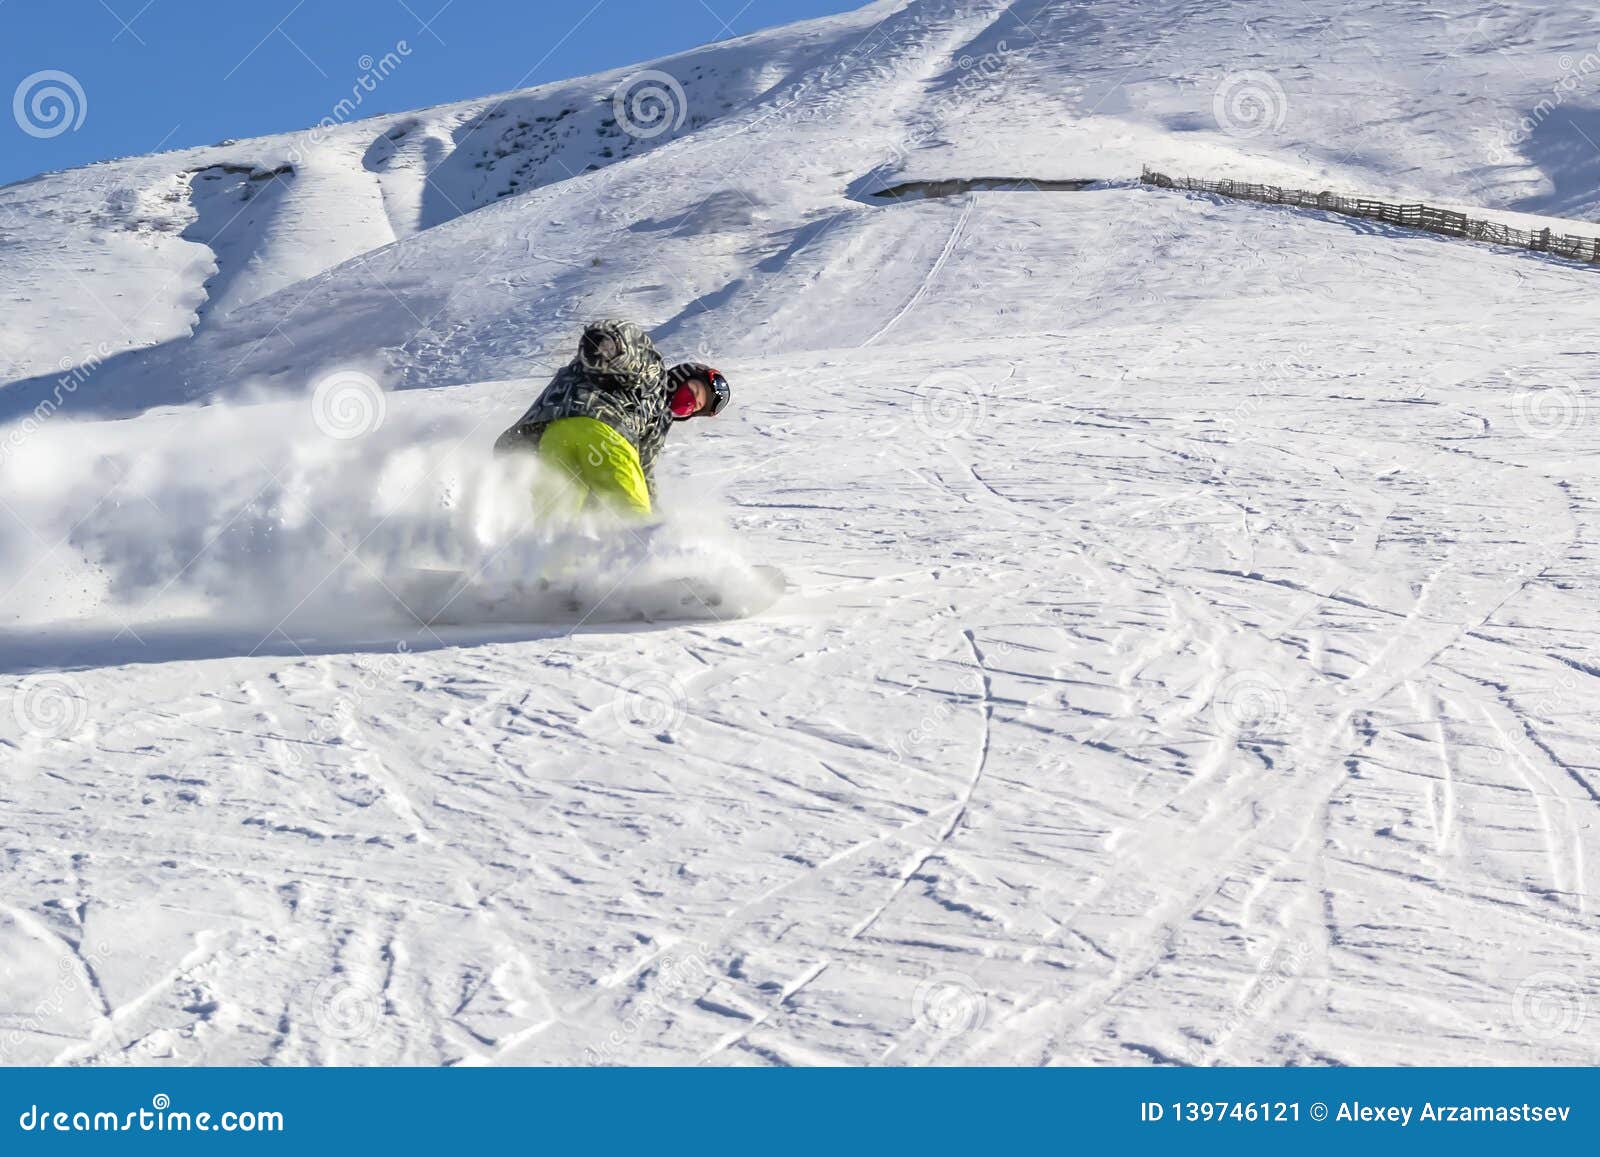 Snowboarder Quickly Rolls Downhill in a Cloud of Snow Dust Against a ...